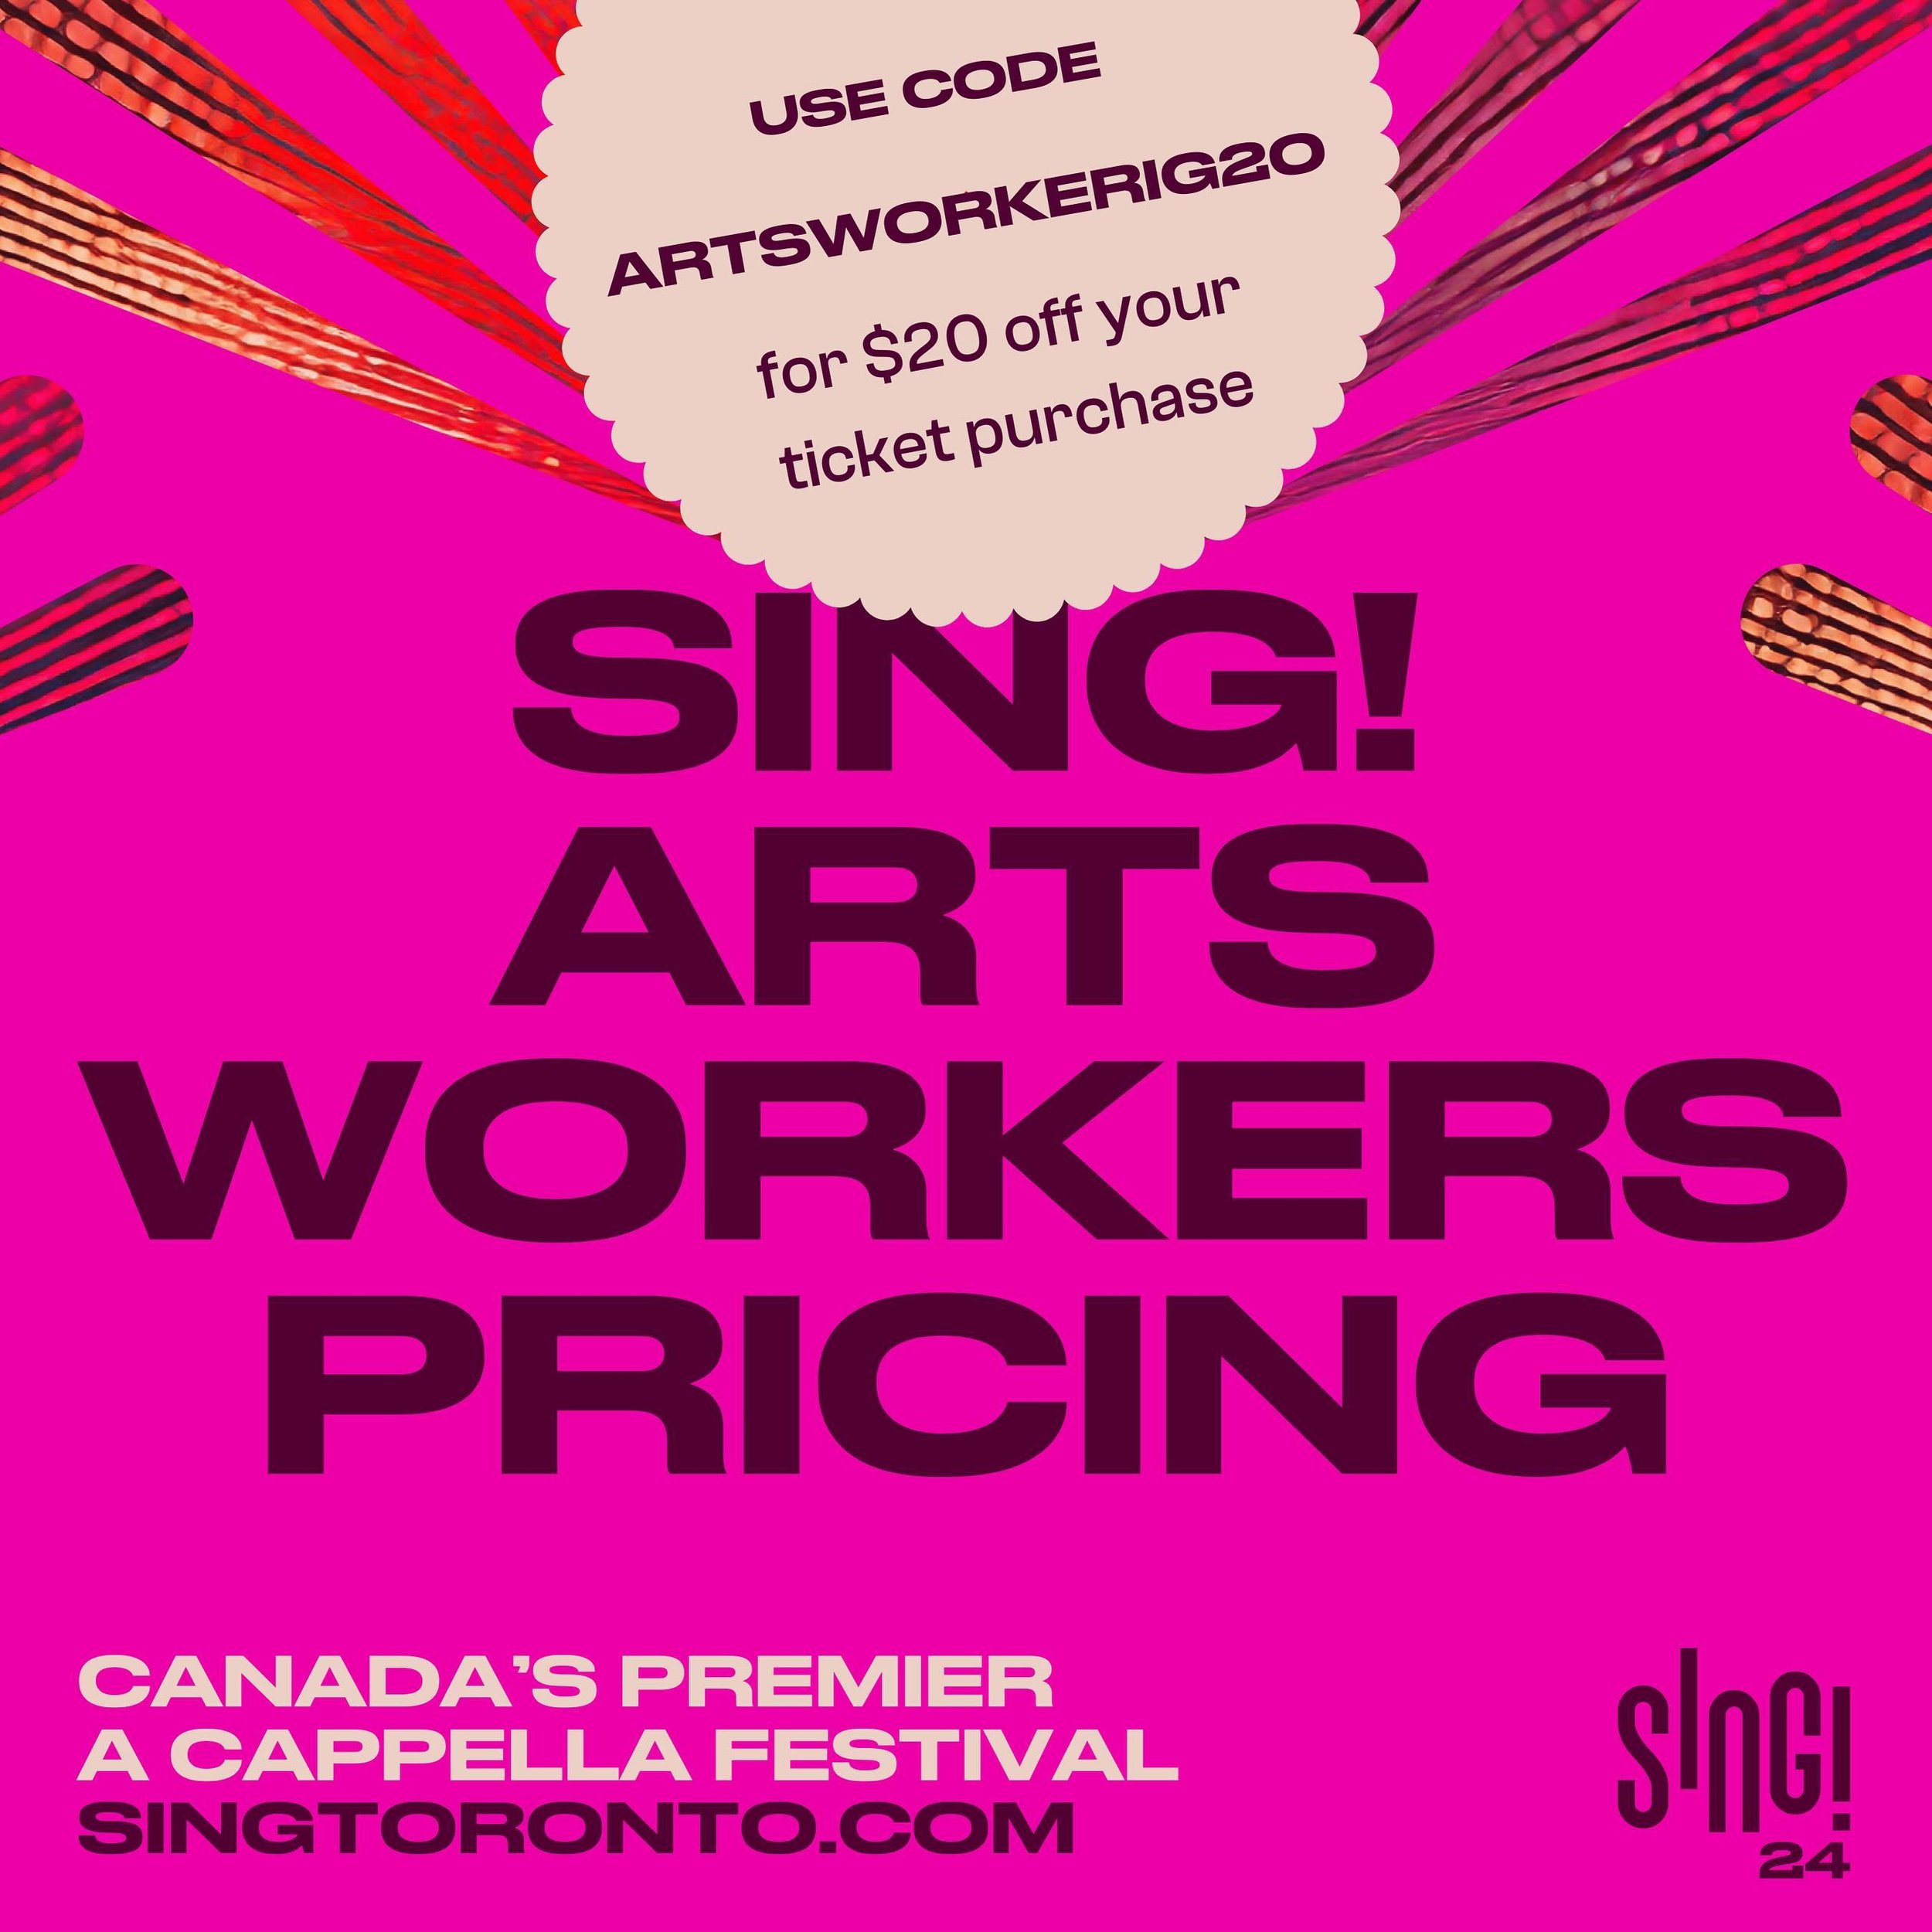 50% all of our ticketed concerts if you&rsquo;re an arts worker! Just use the promo code ARTSWORKERIG20 when you buy your tickets! Visit singtoronto.com for our full schedule of programming. See you there! #SING2024